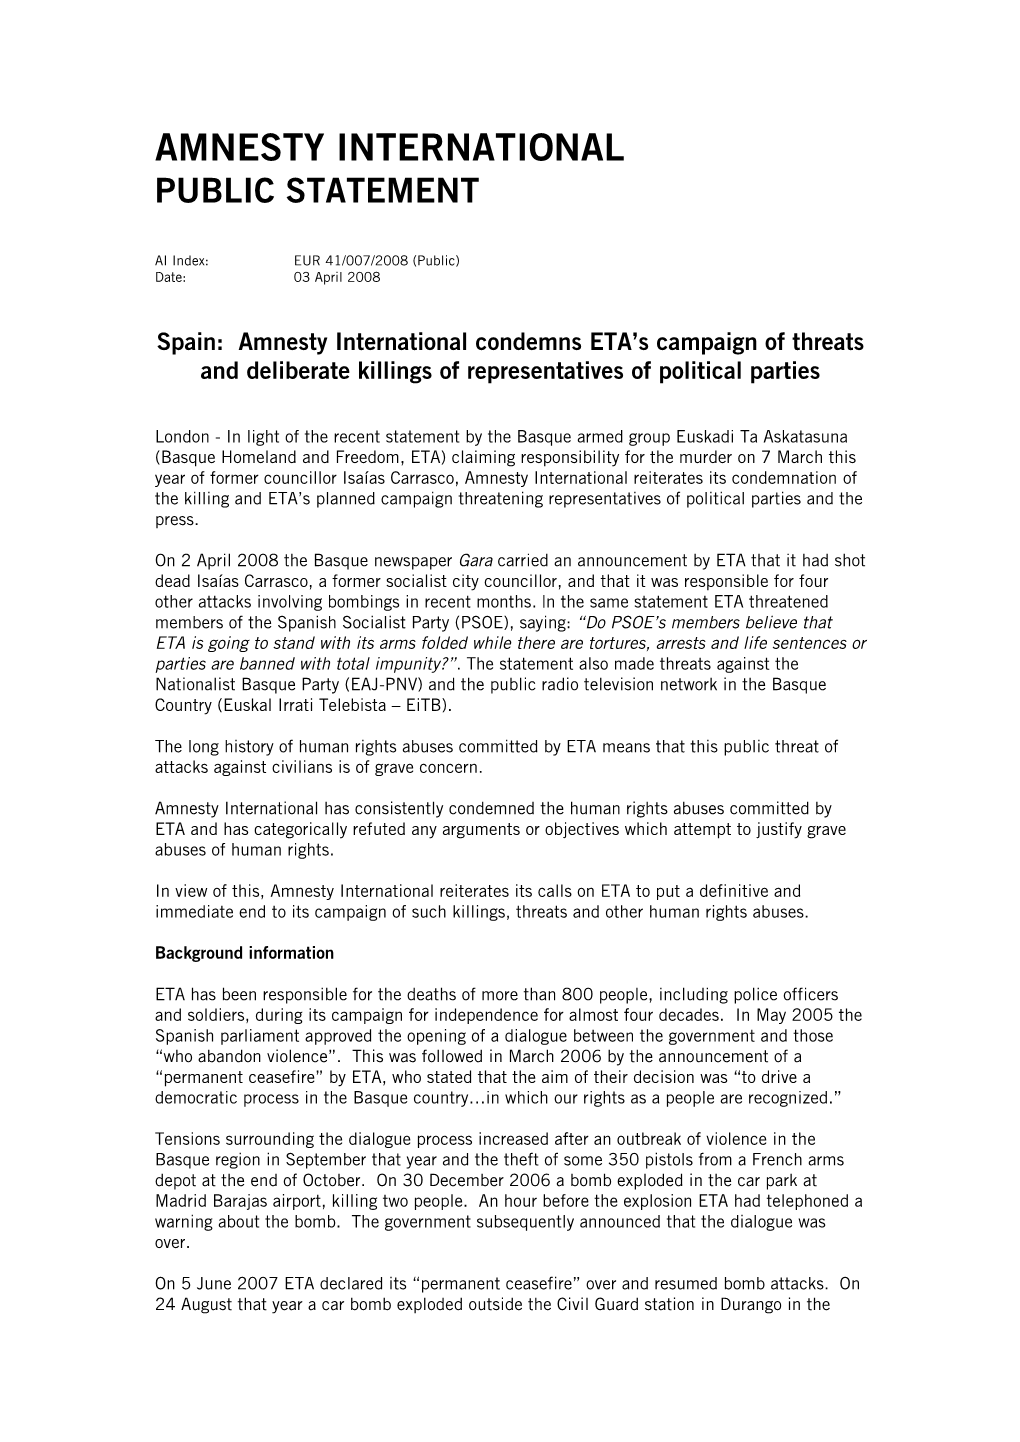 Amnesty International Condemns ETA's Campaign of Threats And